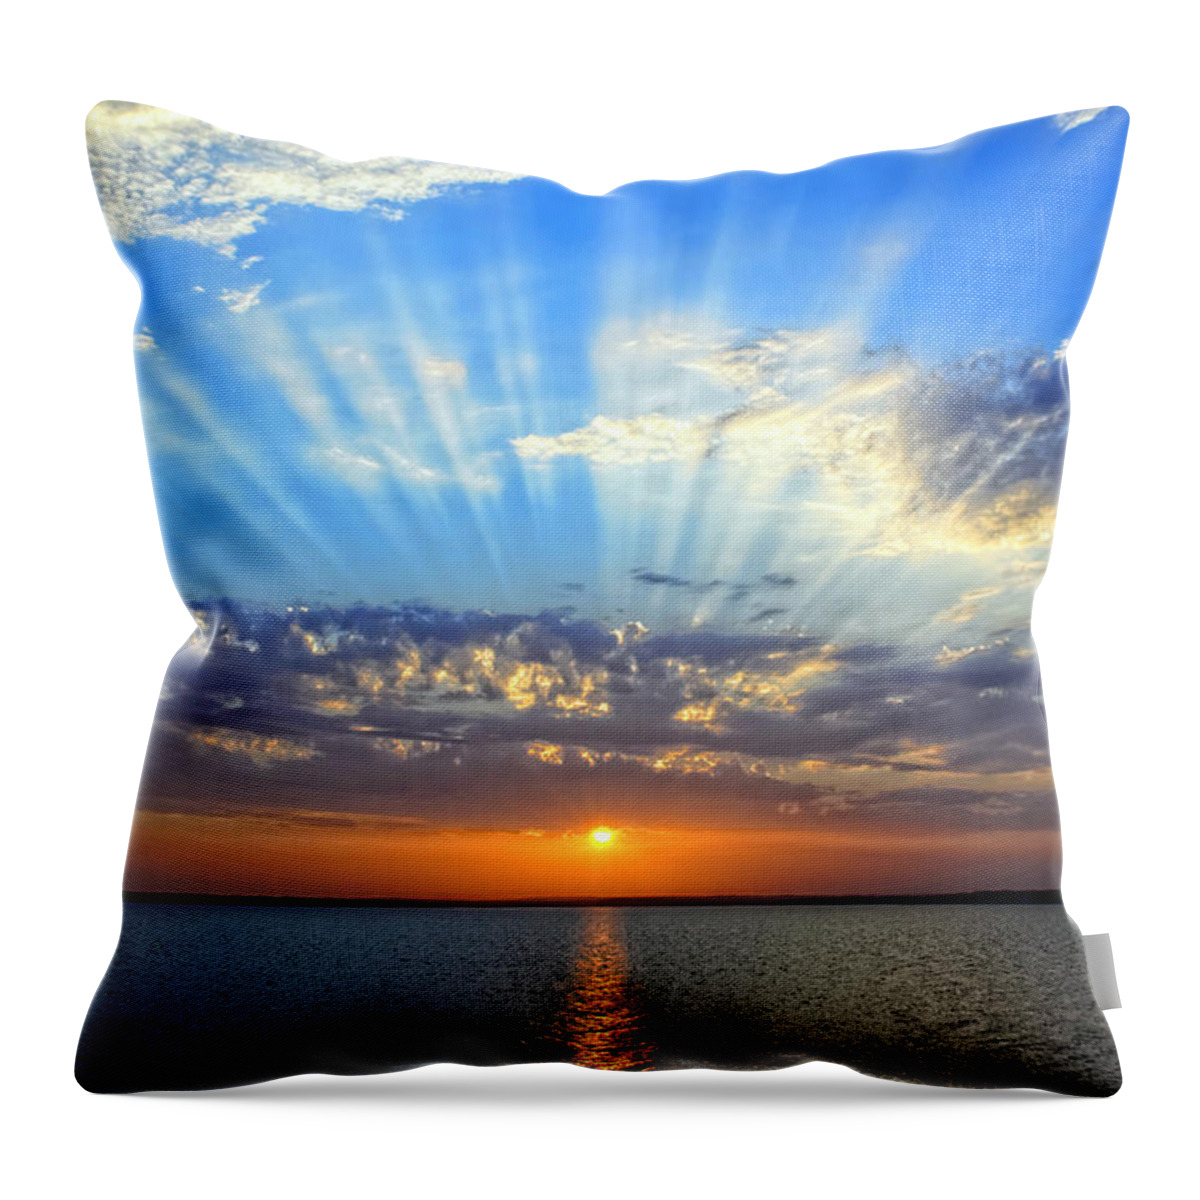 Texas Throw Pillow featuring the photograph Serendipity by Erich Grant